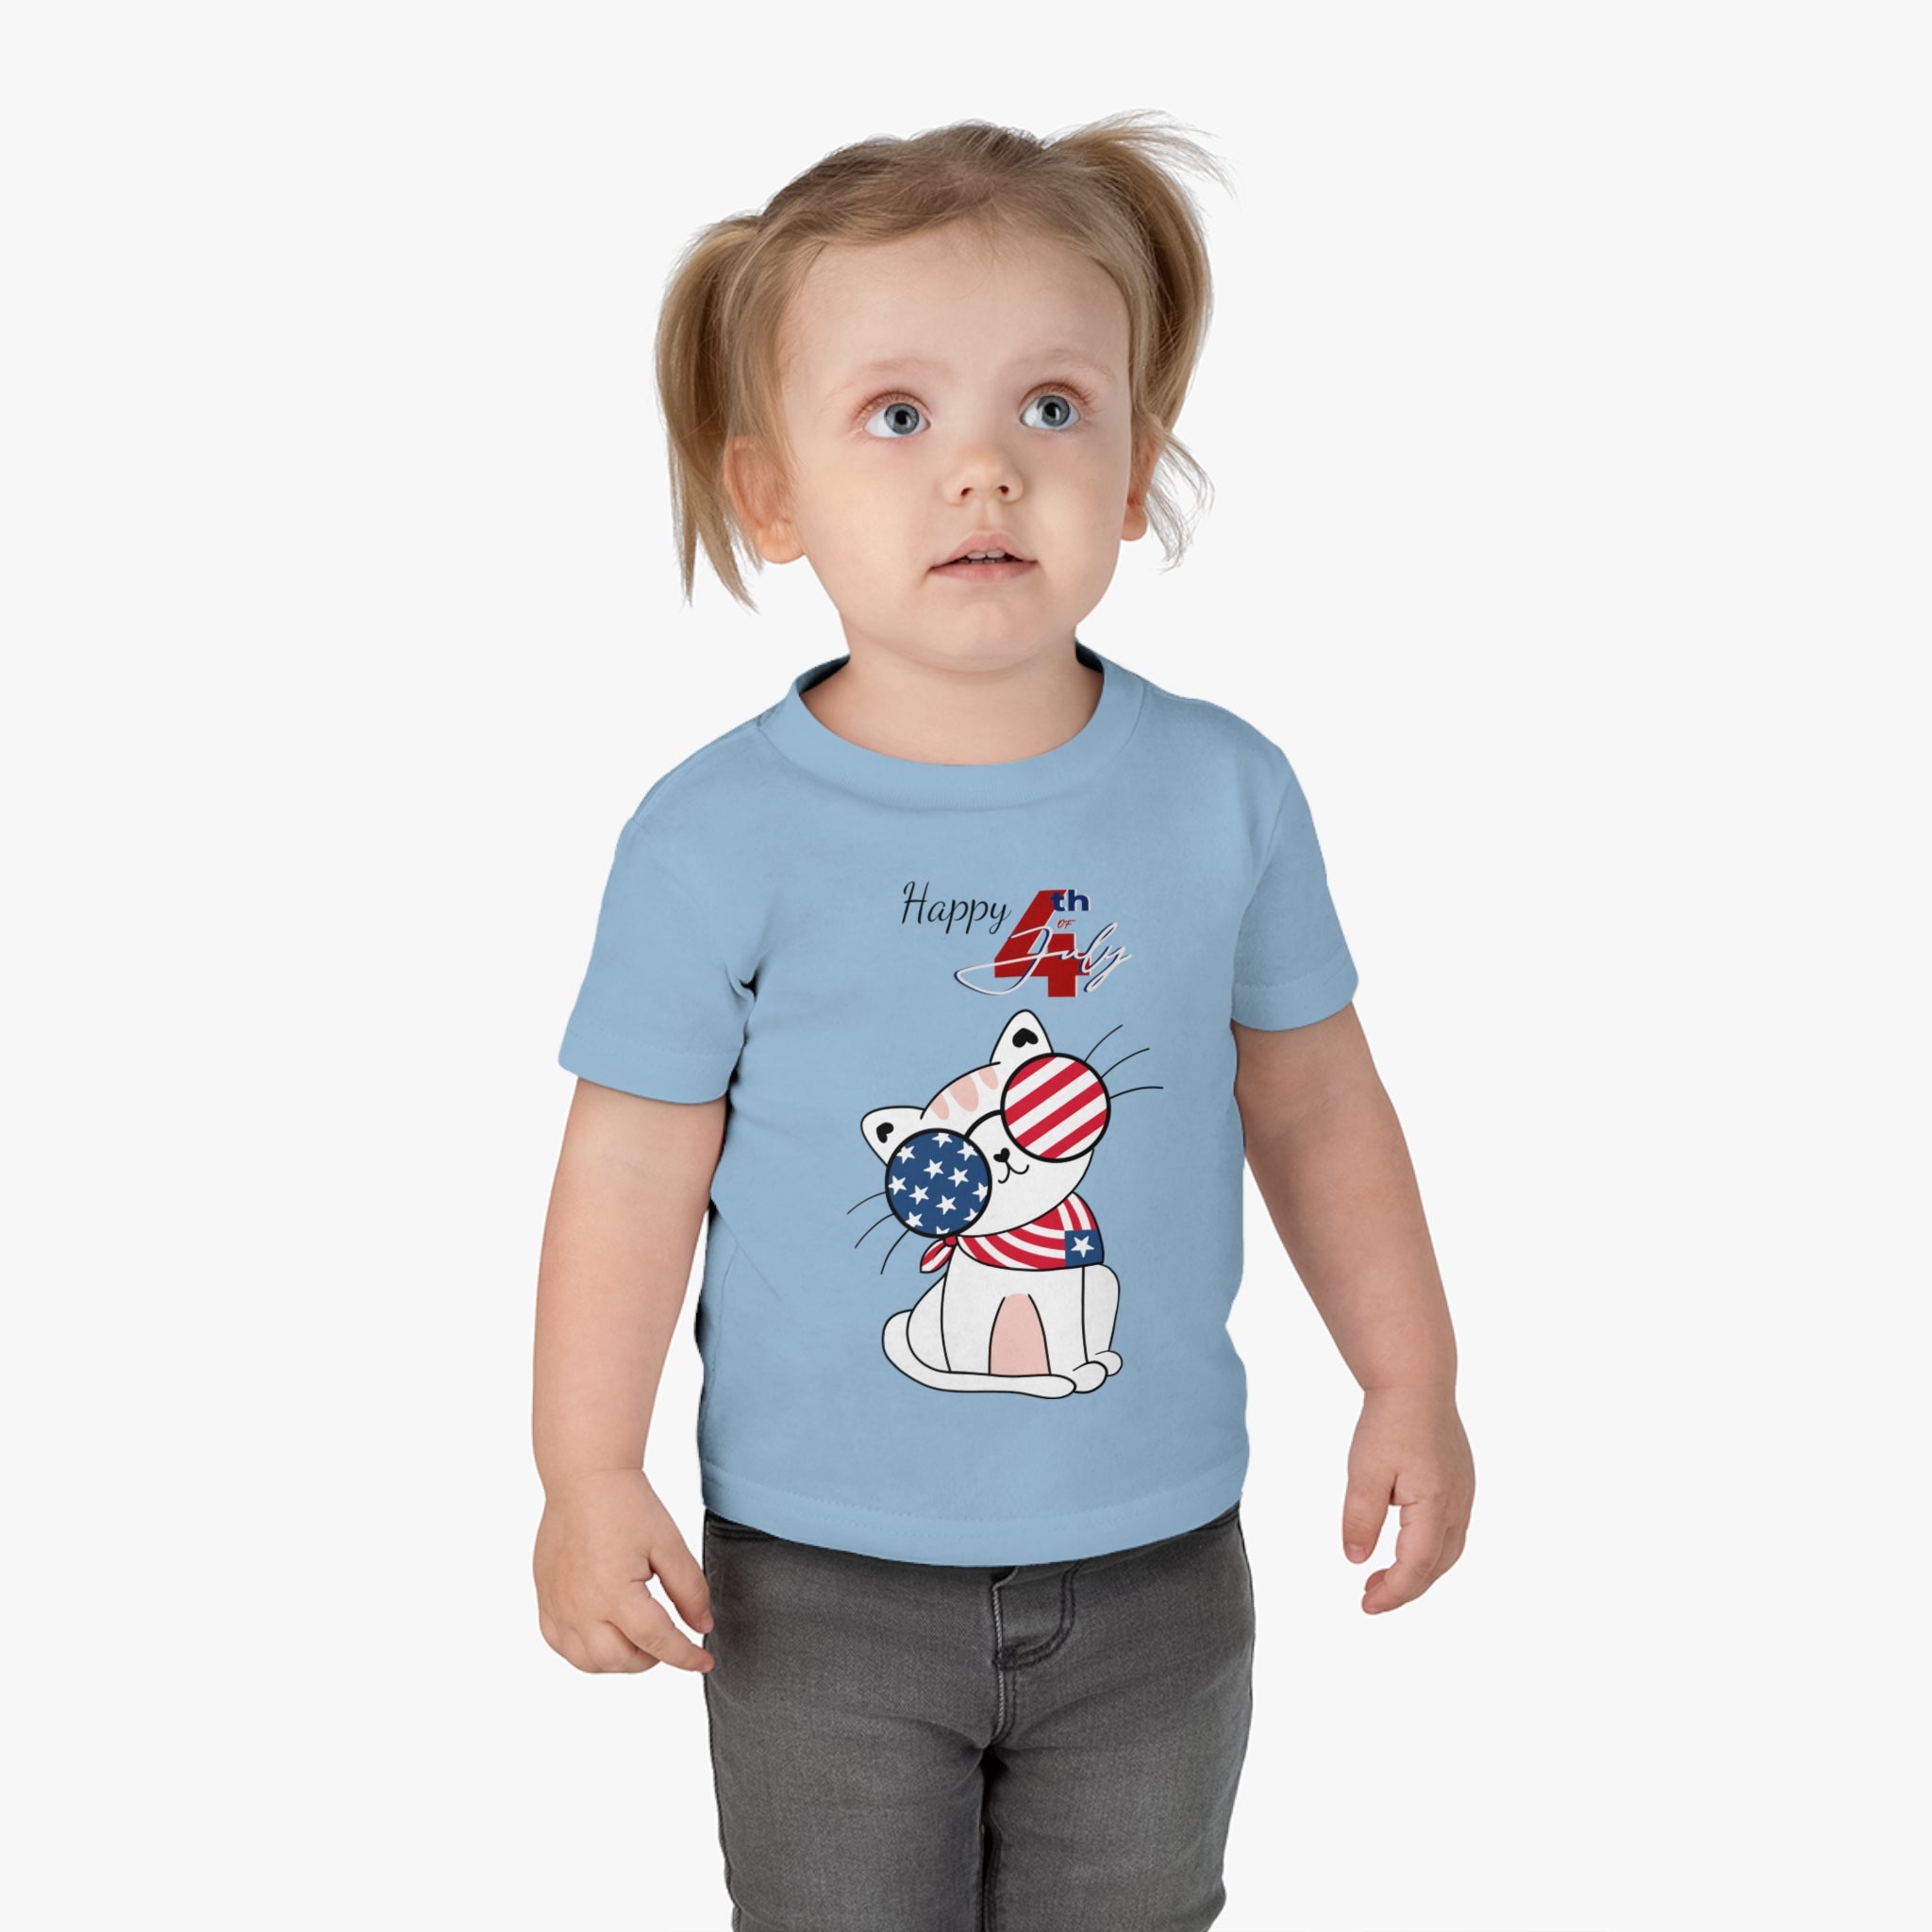 Happy 4th of July Cute Cat design Infant Shirt, Baby Tee, Infant Tee